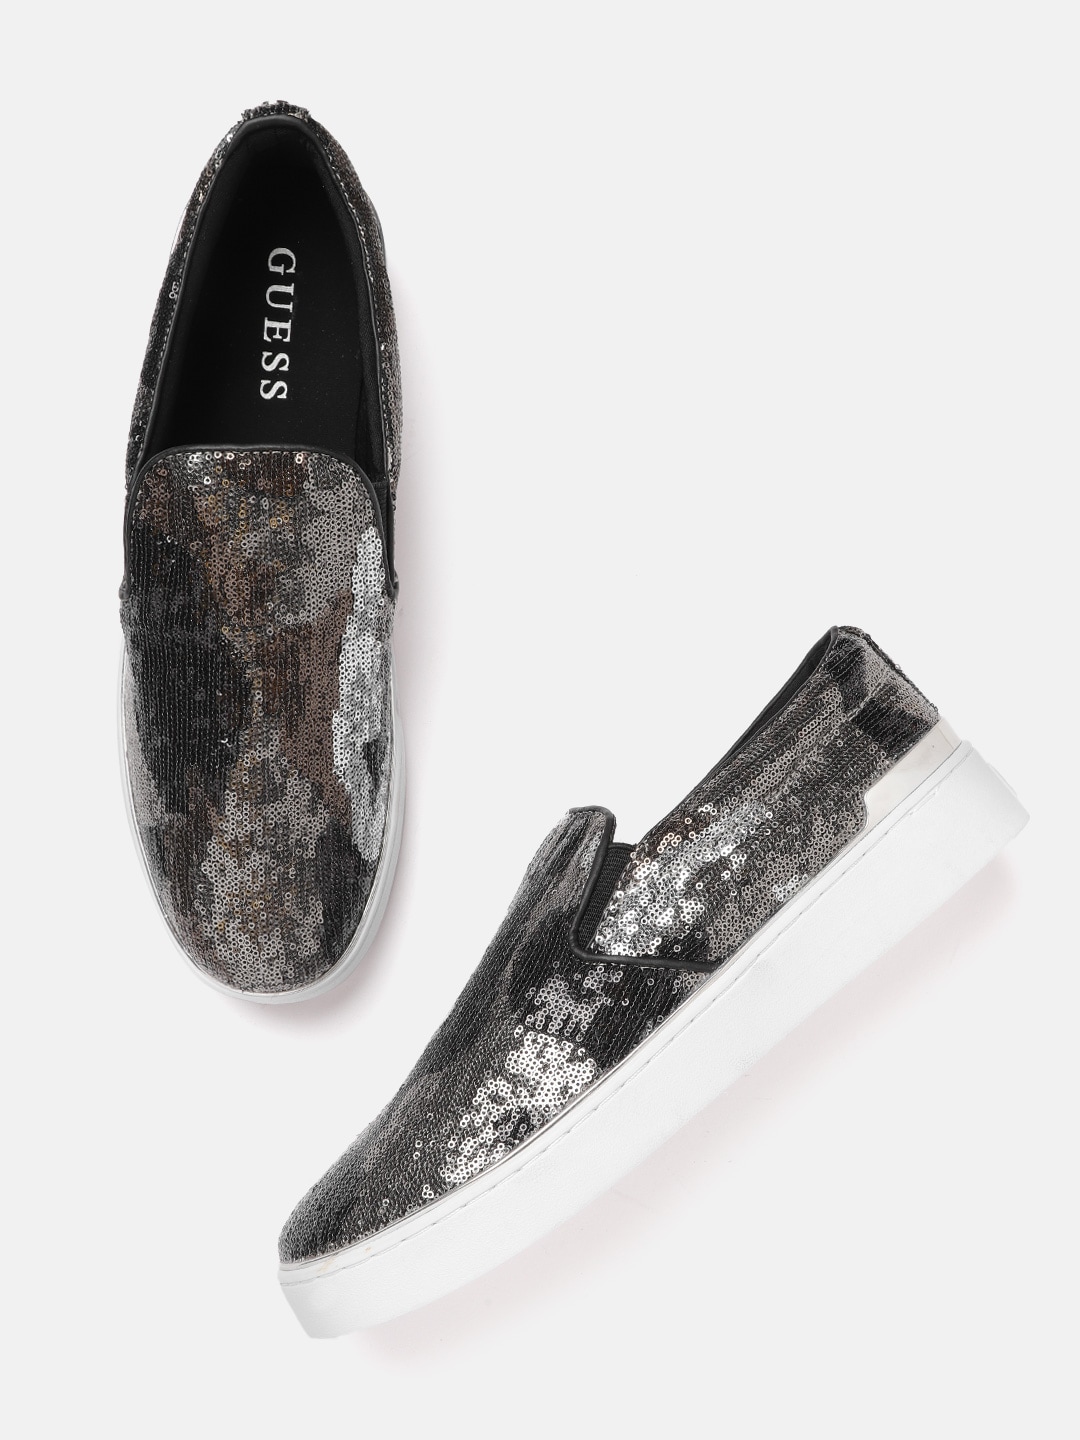 GUESS Women Black & Silver-Toned Sequined Slip-On Sneakers Price in India